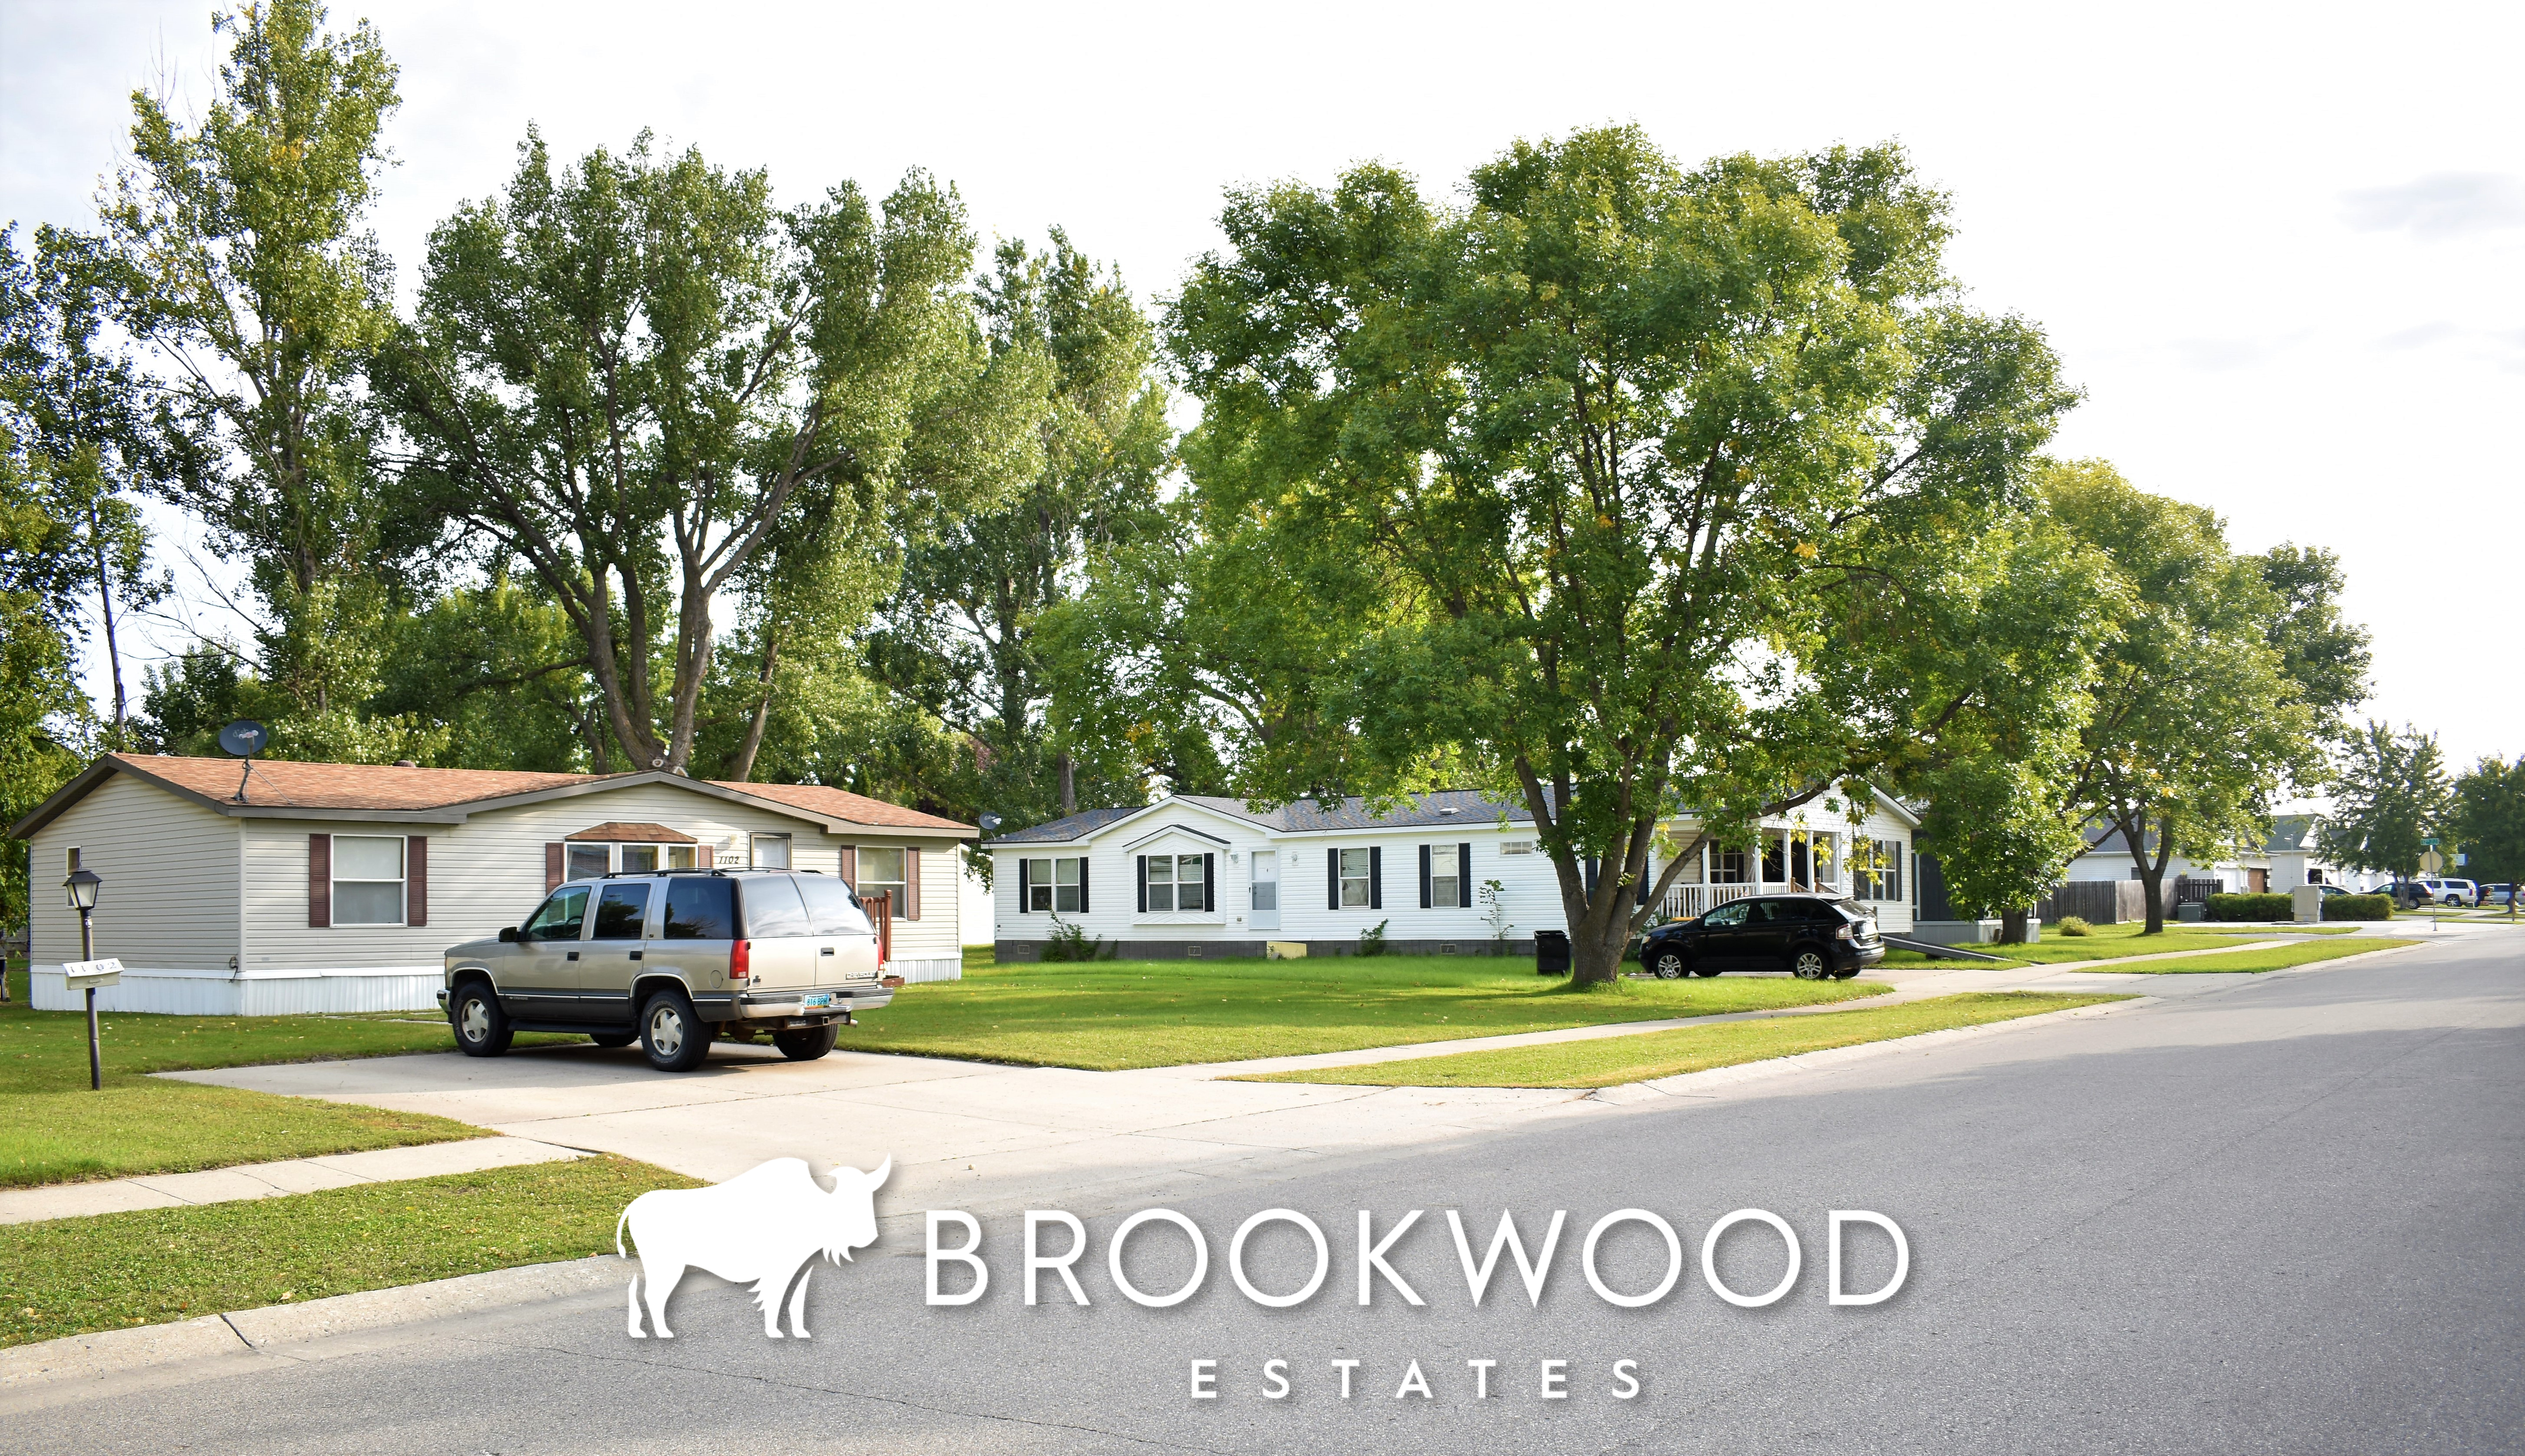 The Natural Beauty of Brookwood Estates